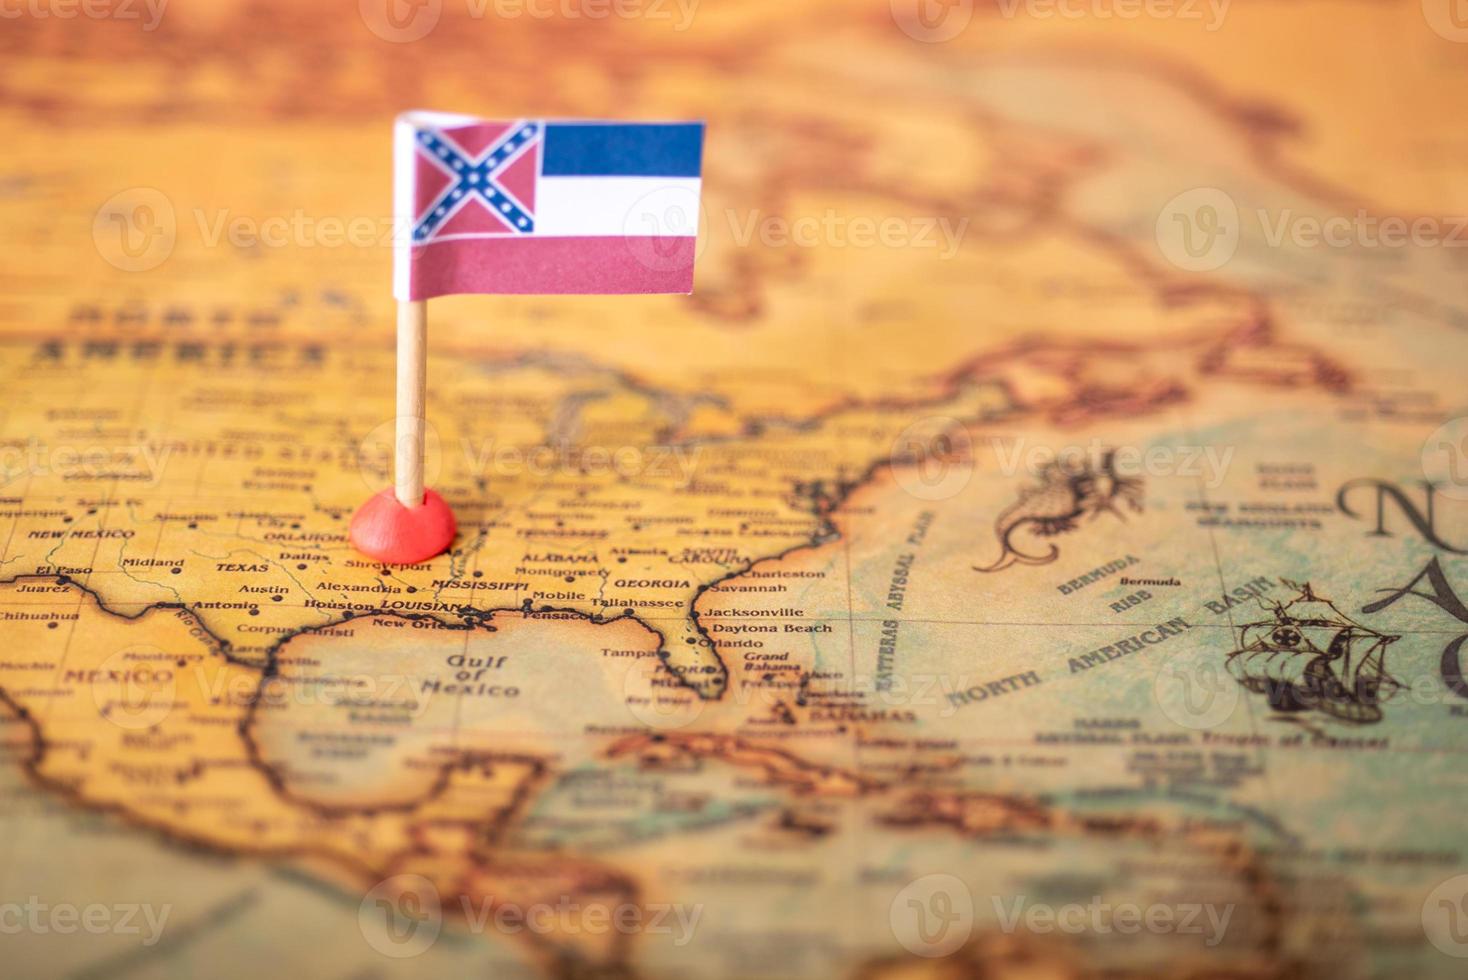 The flag of Mississippi on the old world map. photo